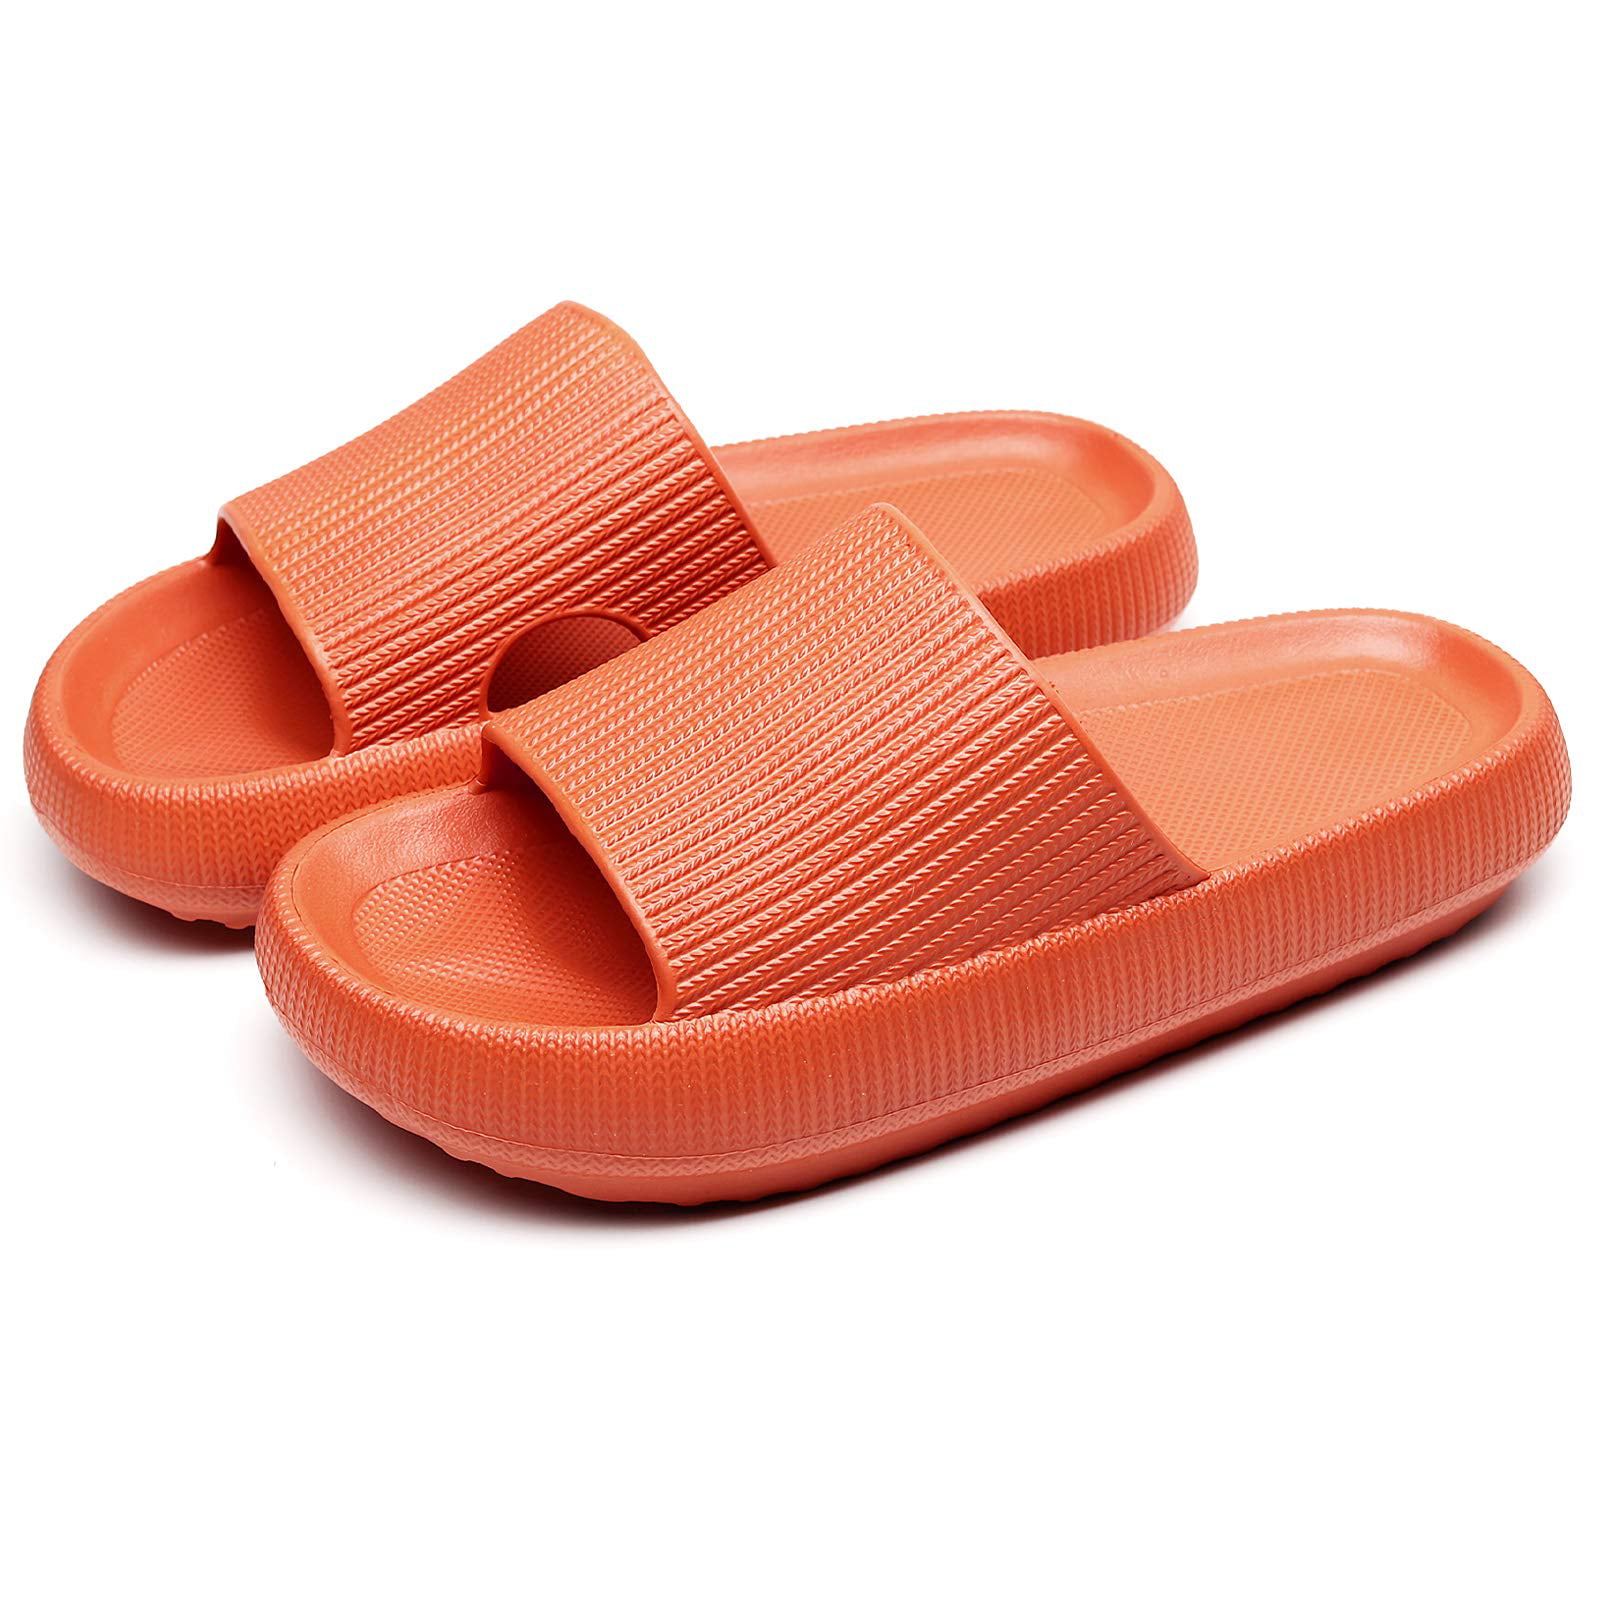 Slippers Slides for Women Men Massage Bathroom Shower Shoes Non-Slip Quick Drying Thick Sole Super Soft Home Open Toe Slippers Beach Pool Gym Spa Slipper